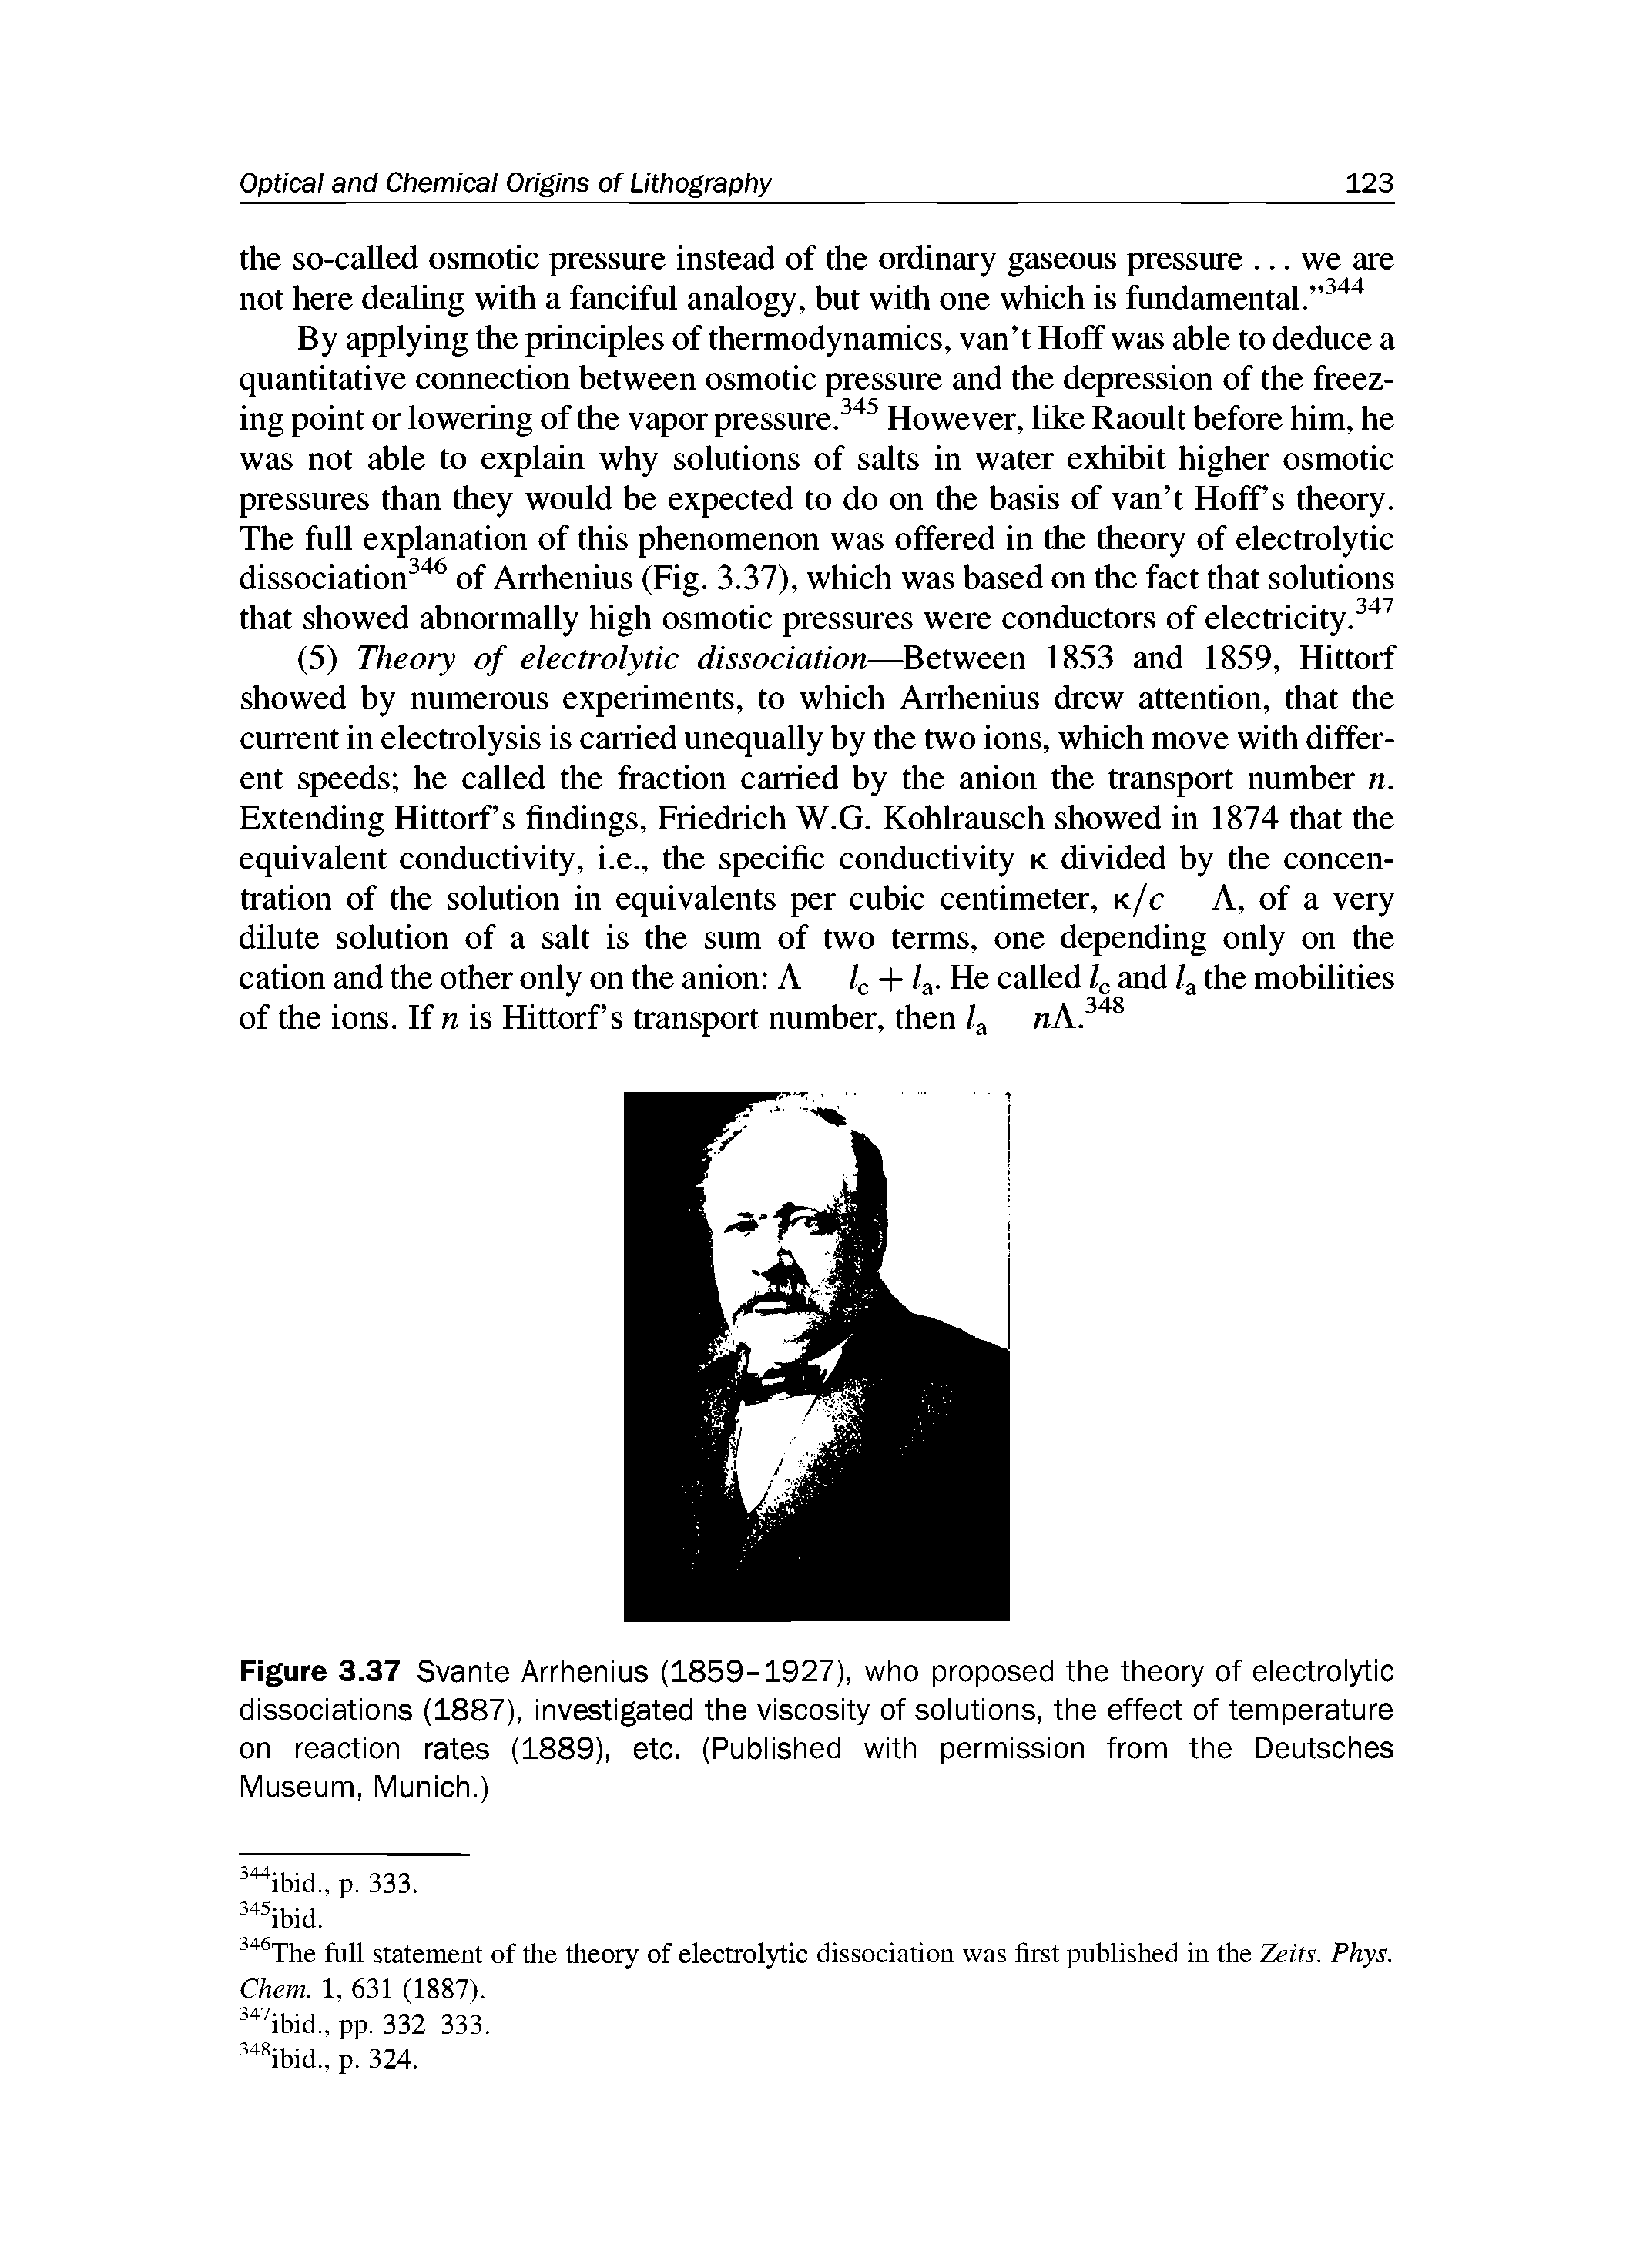 Figure 3.37 Svante Arrhenius (1859-1927), who proposed the theory of electrolytic dissociations (1887), investigated the viscosity of solutions, the effect of temperature on reaction rates (1889), etc. (Published with permission from the Deutsches Museum, Munich.)...